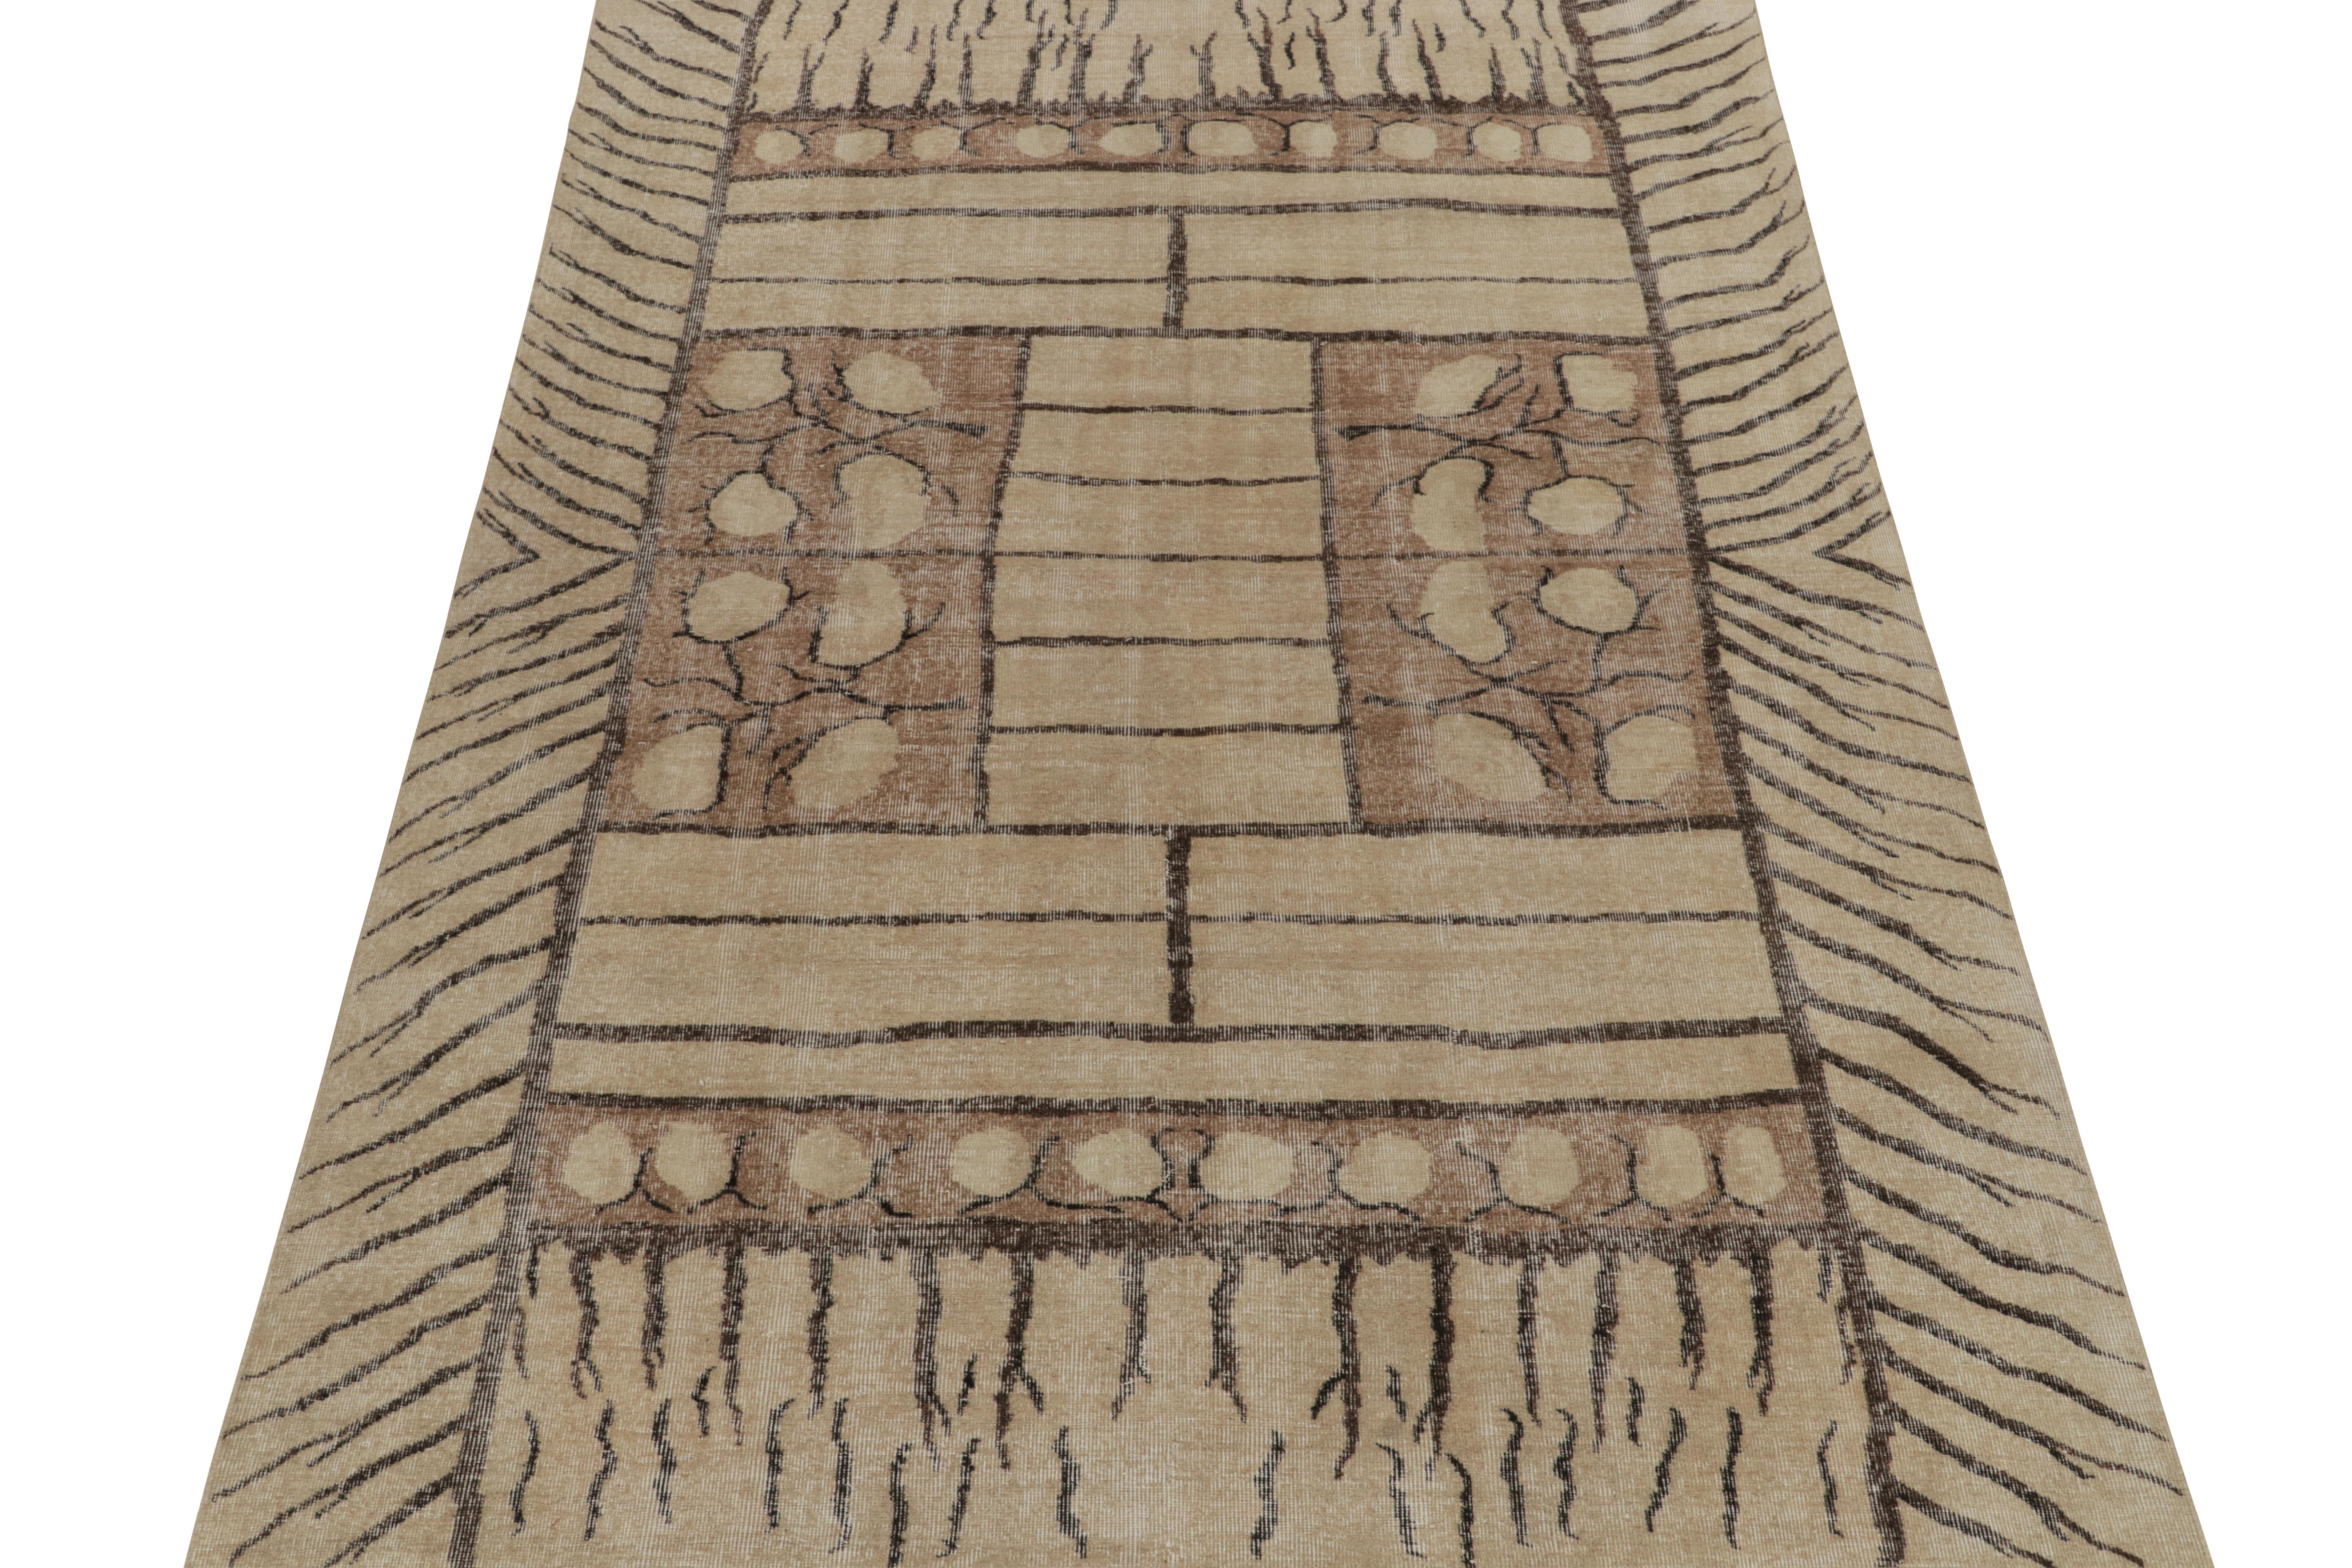 Hand-knotted in wool, a 7x10 vintage rug from an innovative Turkish designer is commemorated in Rug & Kilim’s Mid-Century Pasha Collection. 

This 1960s piece enjoys an exemplary play of this artist’s worldly artistic influences in carpet design,